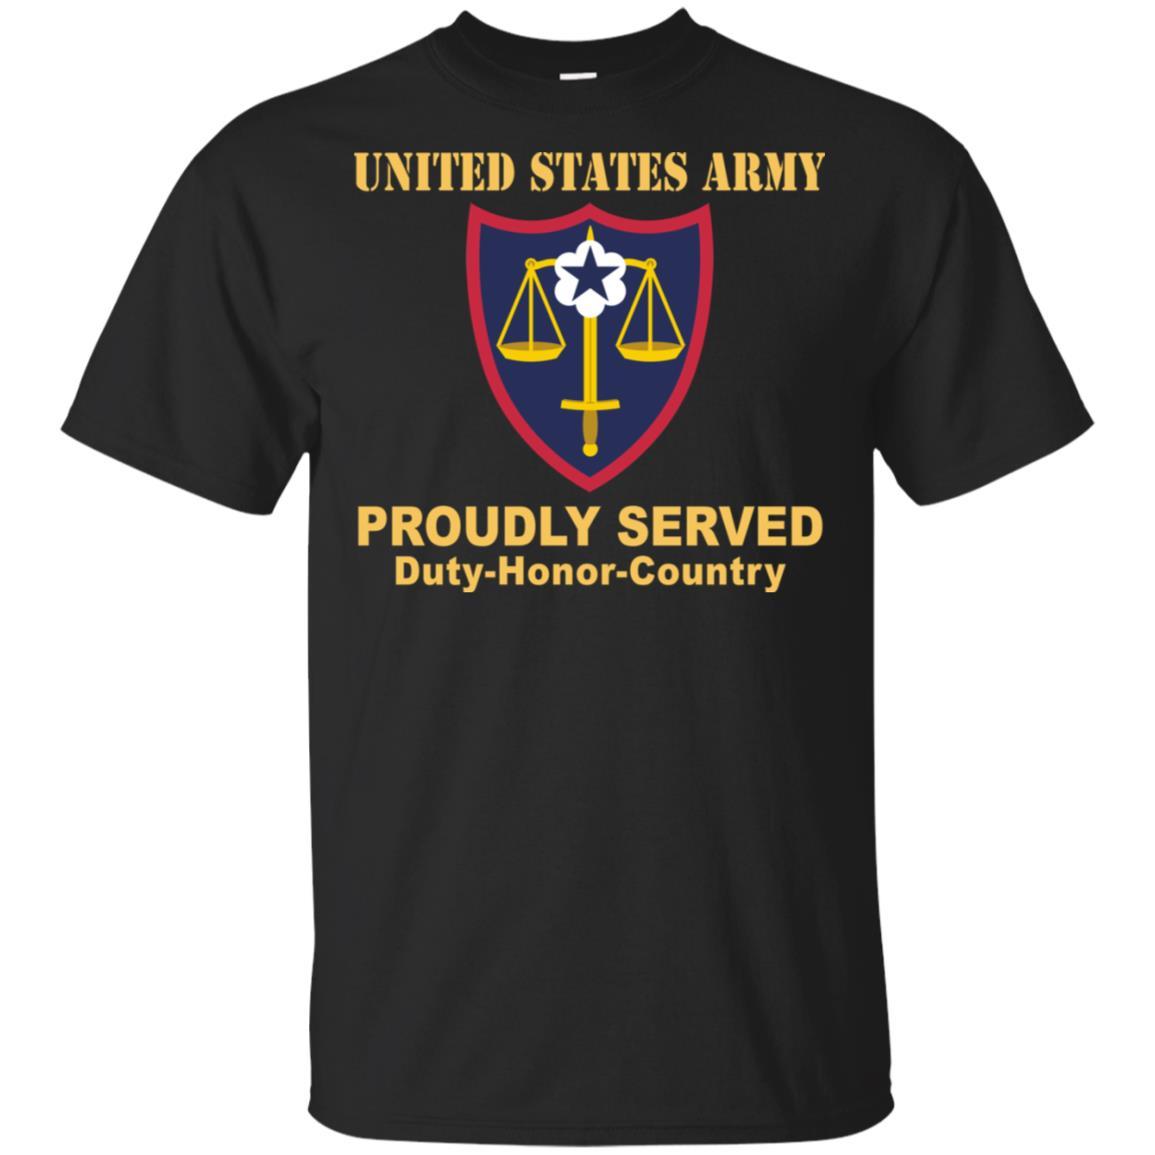 US ARMY TRIAL DEFENSE SERVICE- Proudly Served T-Shirt On Front For Men-TShirt-Army-Veterans Nation